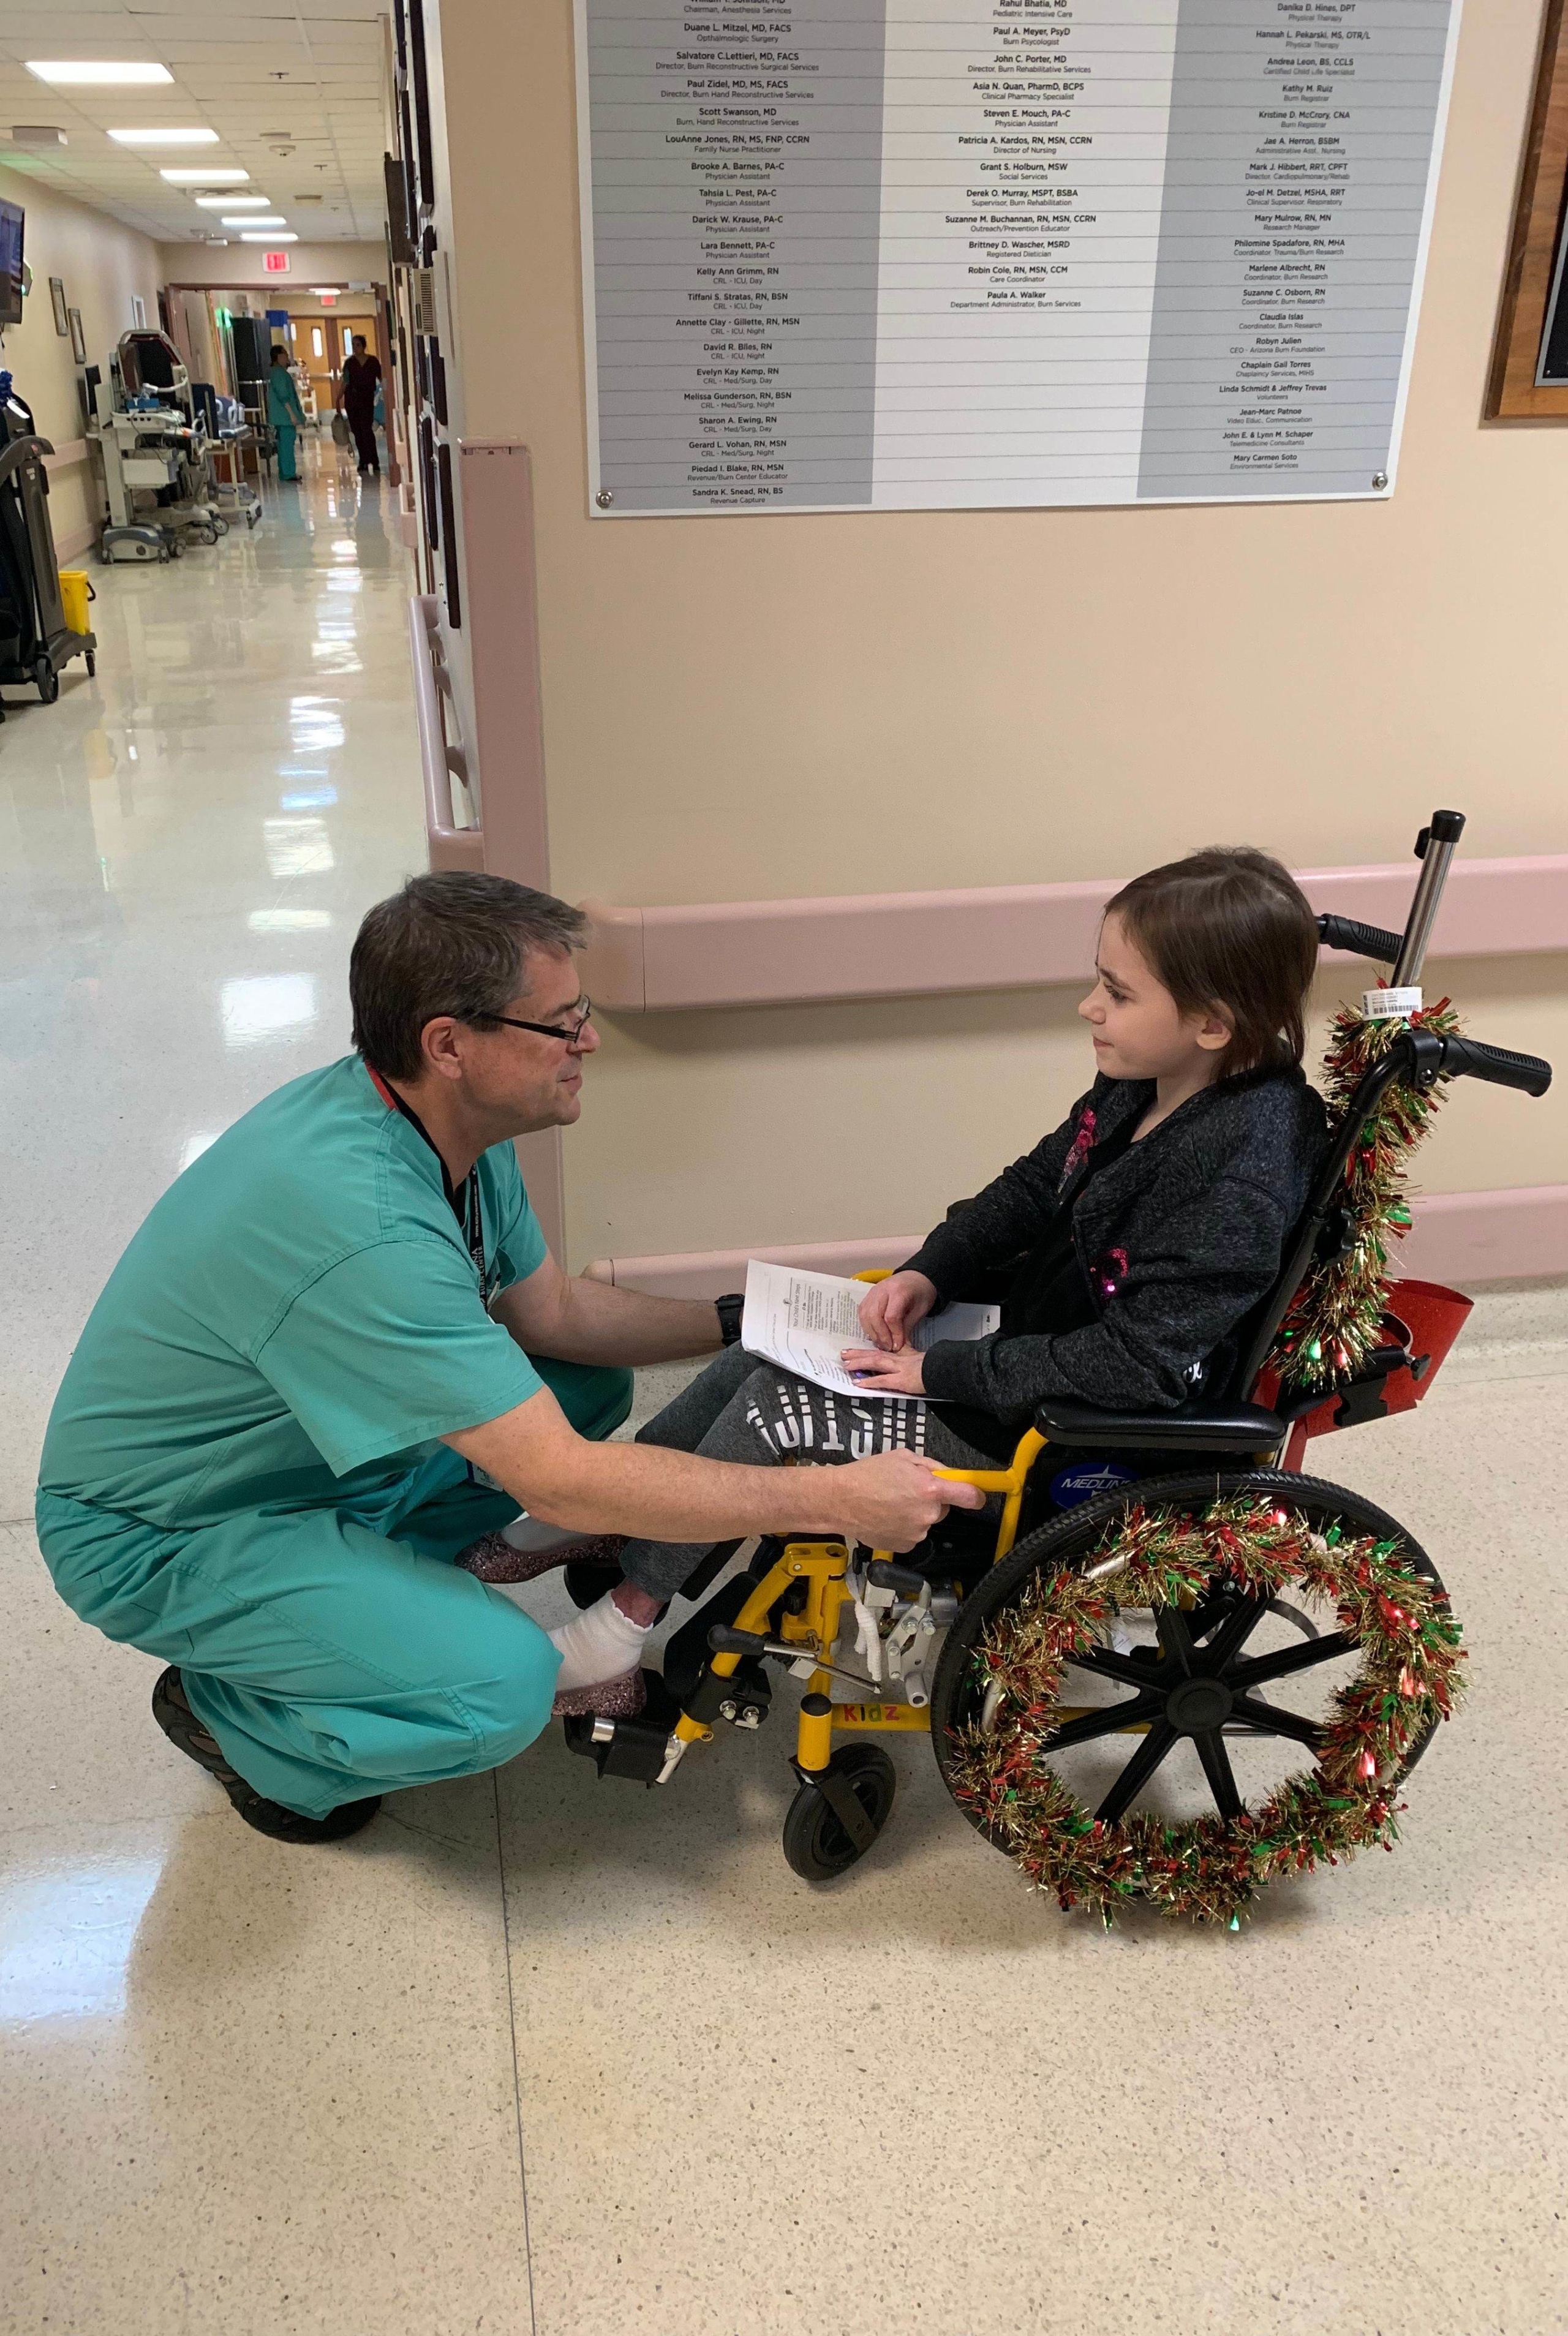 Dr. Kevin Foster, head of the Arizona Burn Center in Phoenix, says goodbye to 9-year-old Isabella McCune as she leaves after nine months in his care. The doctor pushed her wheelchair out to her parents' car.